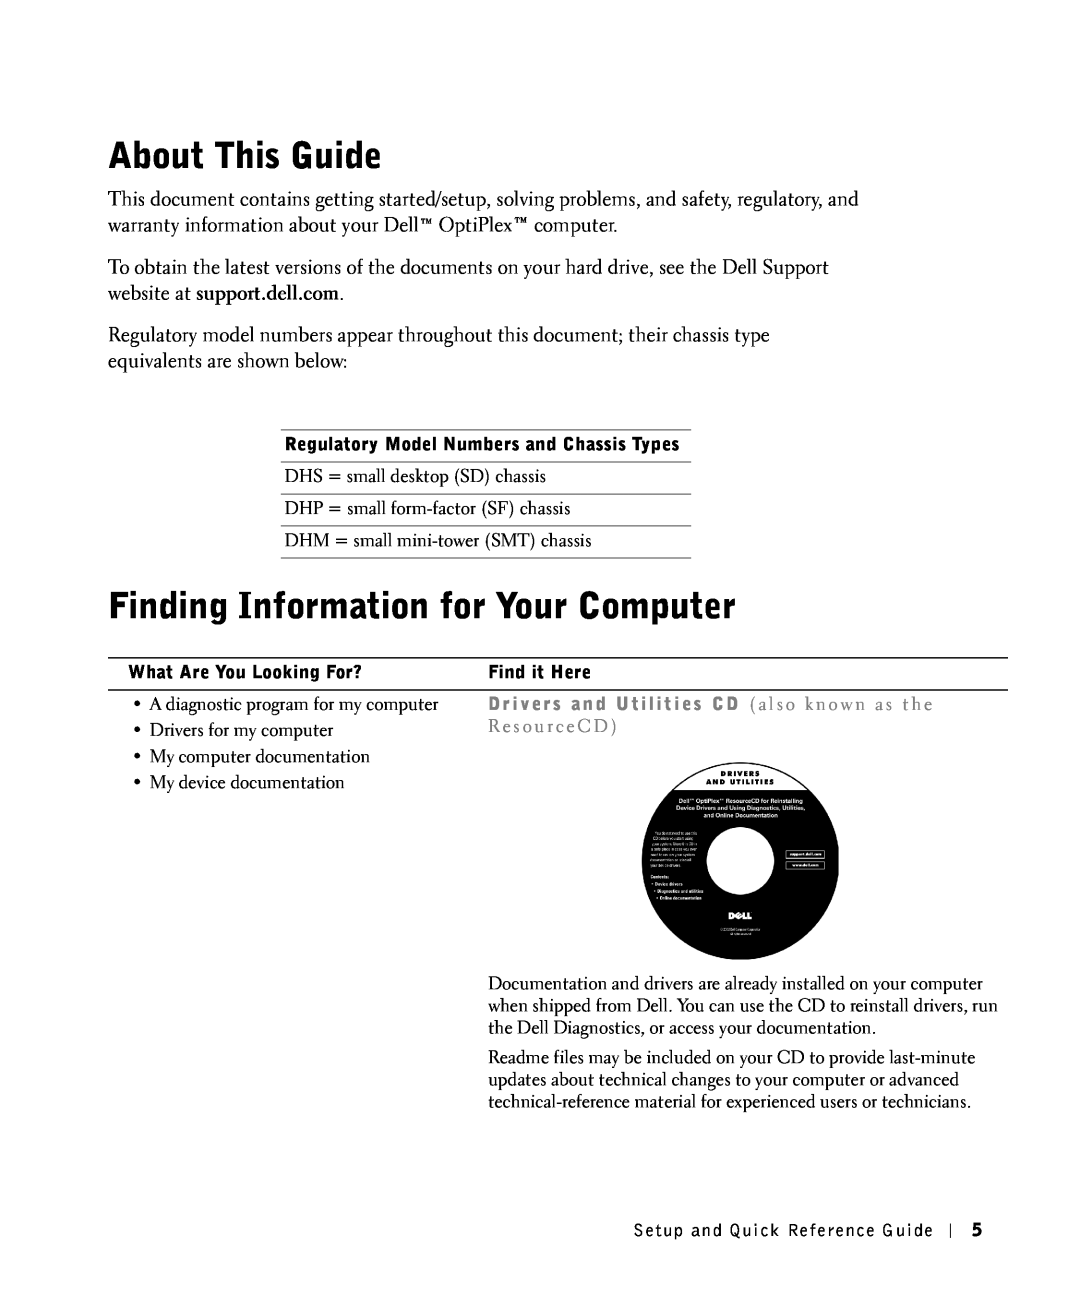 Dell 81FTK manual About This Guide, Finding Information for Your Computer 